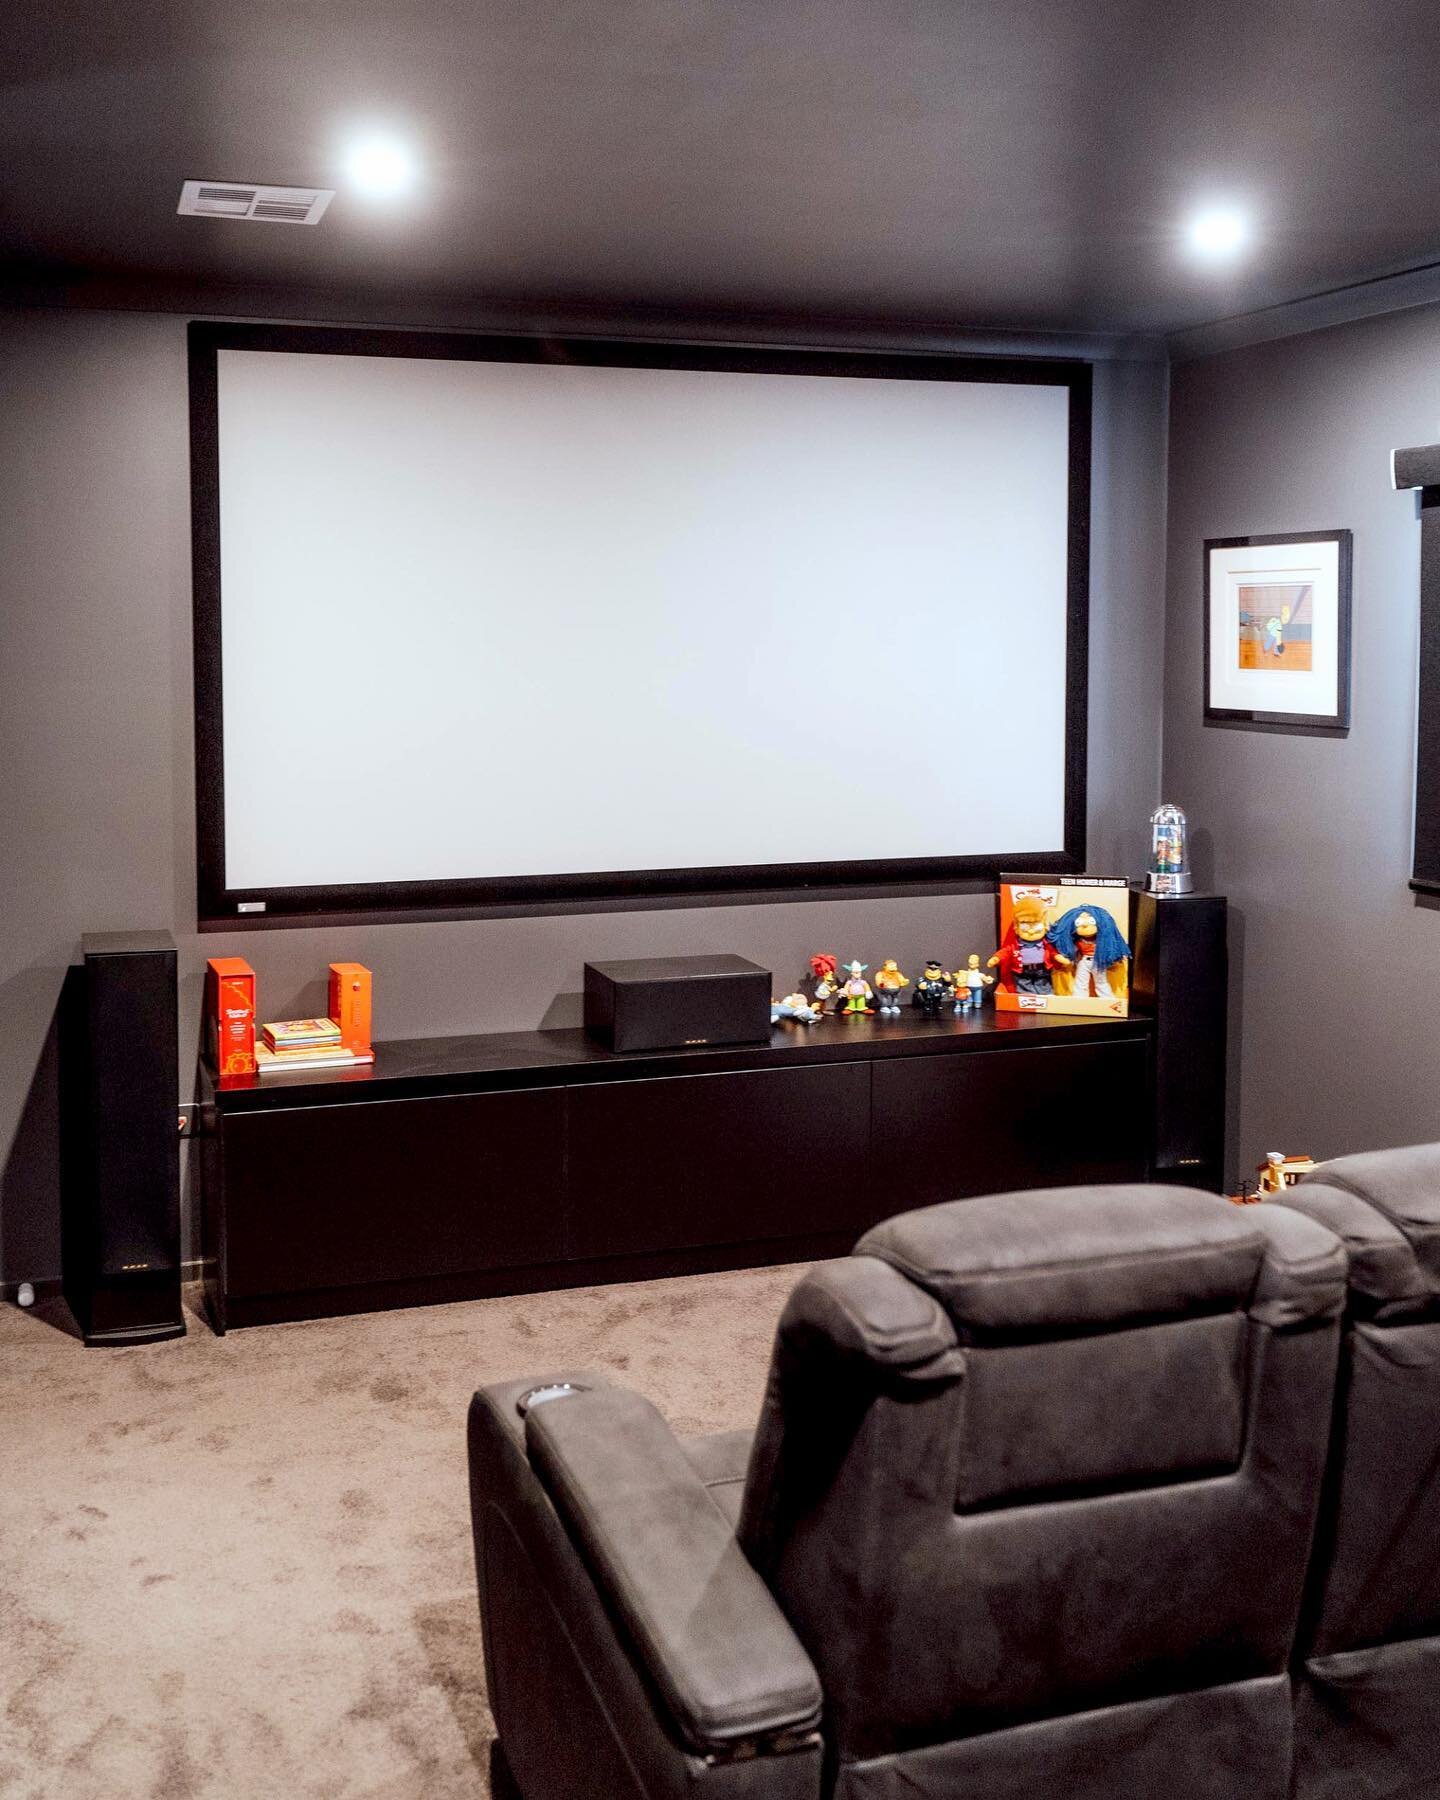 What would be the first movie you&rsquo;d watch in this cinema room? 🍿
-
We recently added some extra storage in this home cinema, which included some draws to hold BluRay DVD&rsquo;s, and shelves to hold valuable memorabilia. 
-
Need more storage i